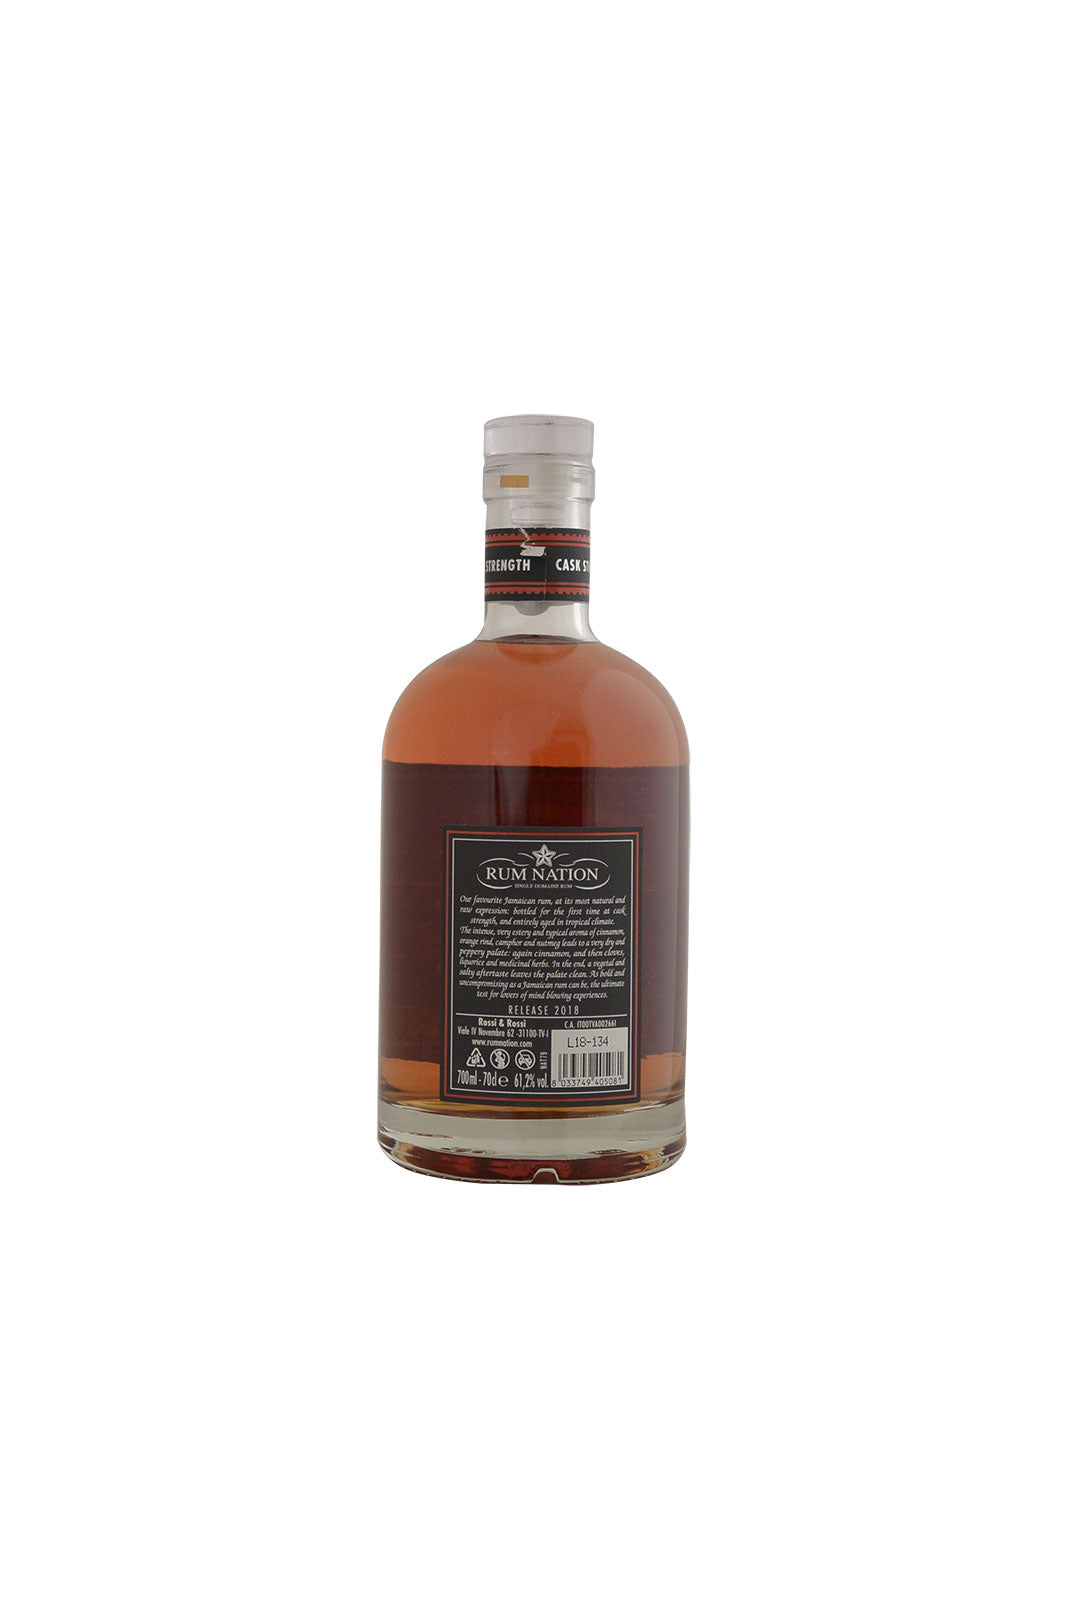 Rum Nation Jamaica 7 Year Old Cask Strenght